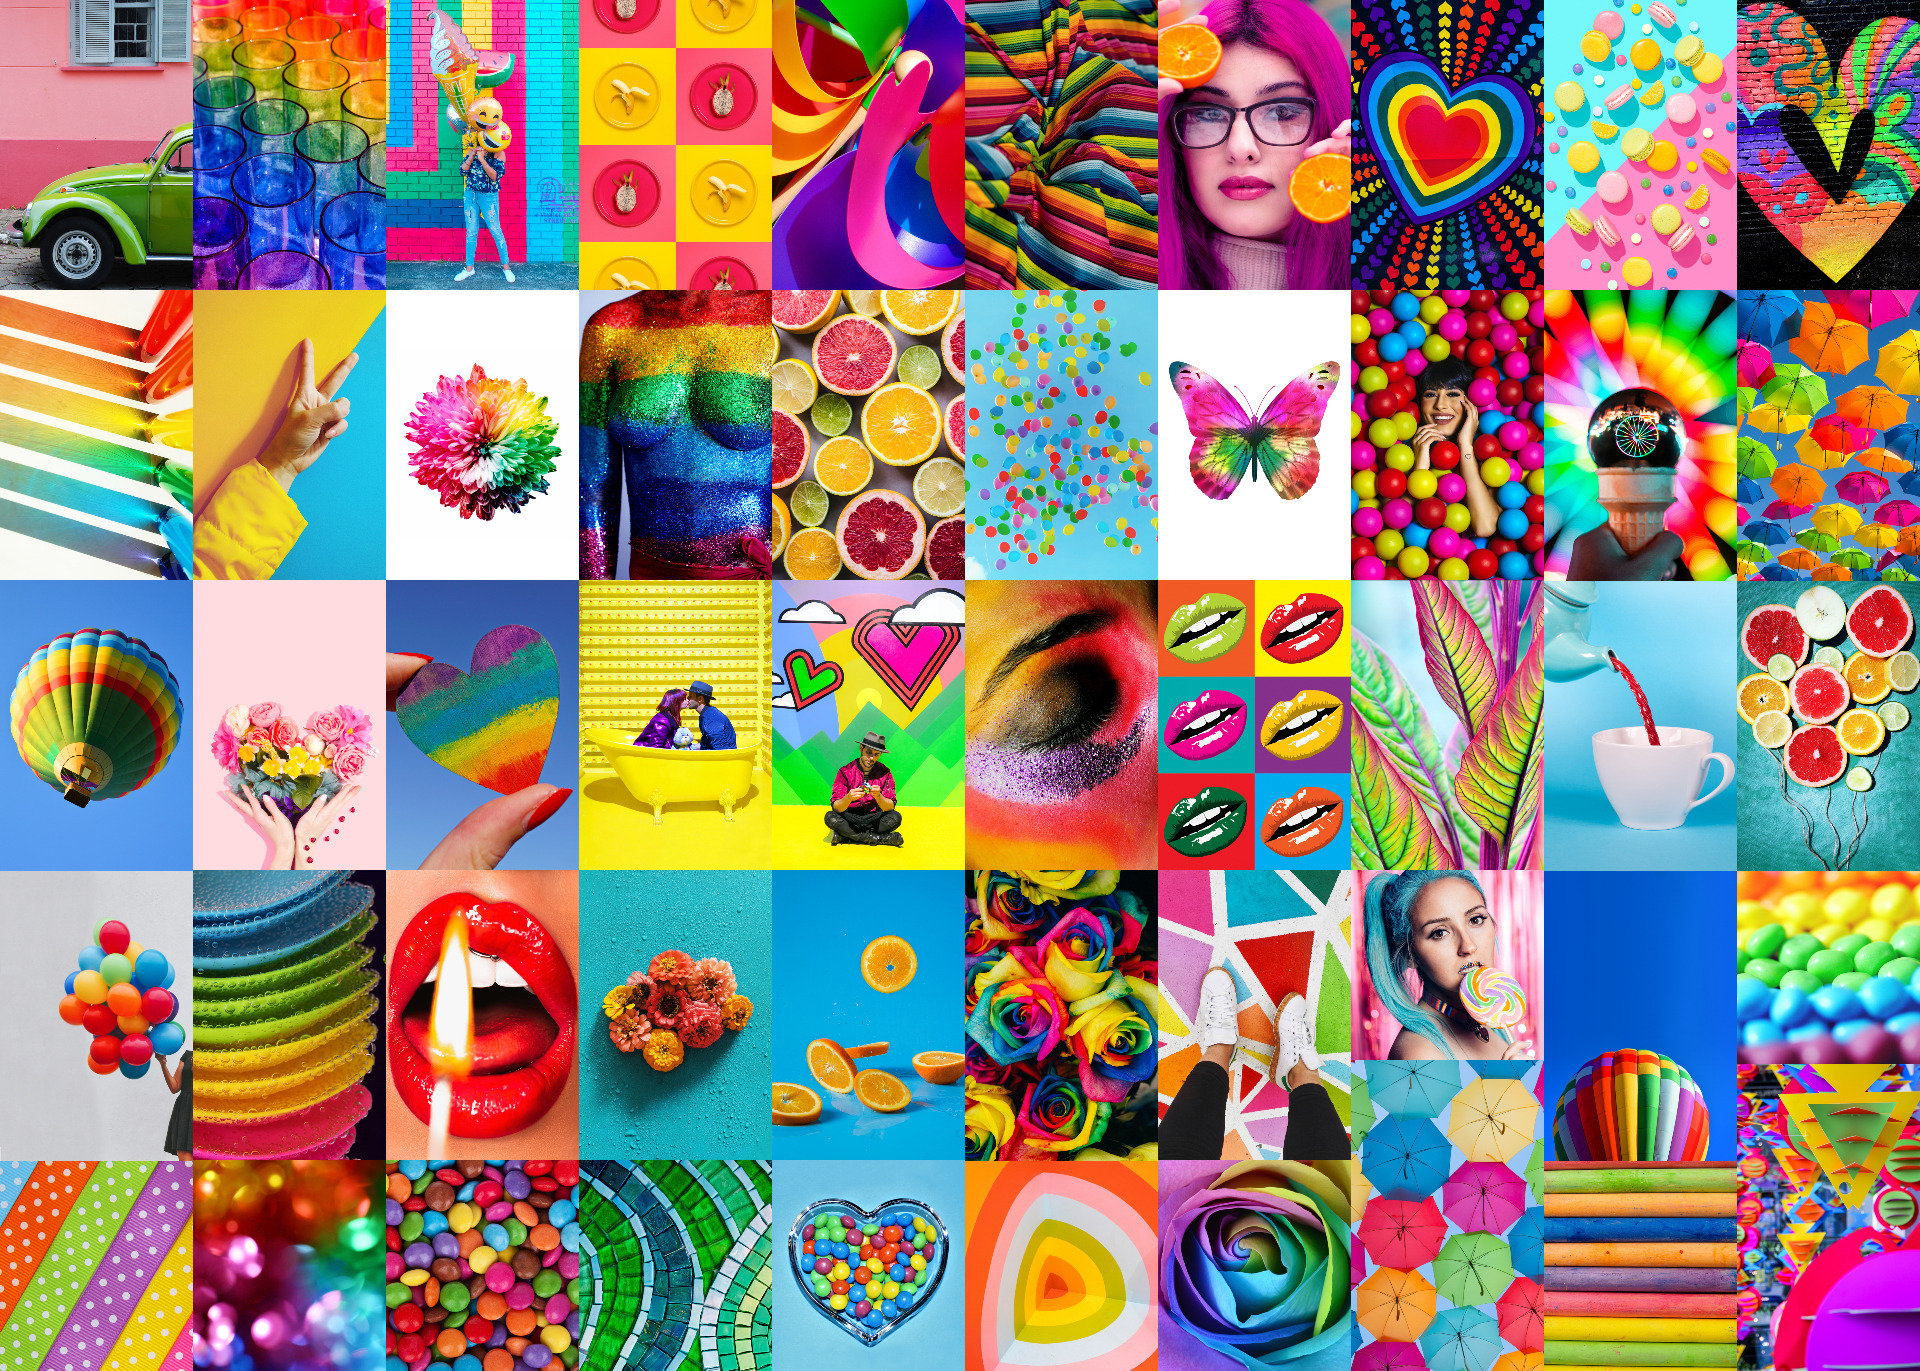 Colorful Rainbow Aesthetic Wall Collage Kit. Indie Kidcore